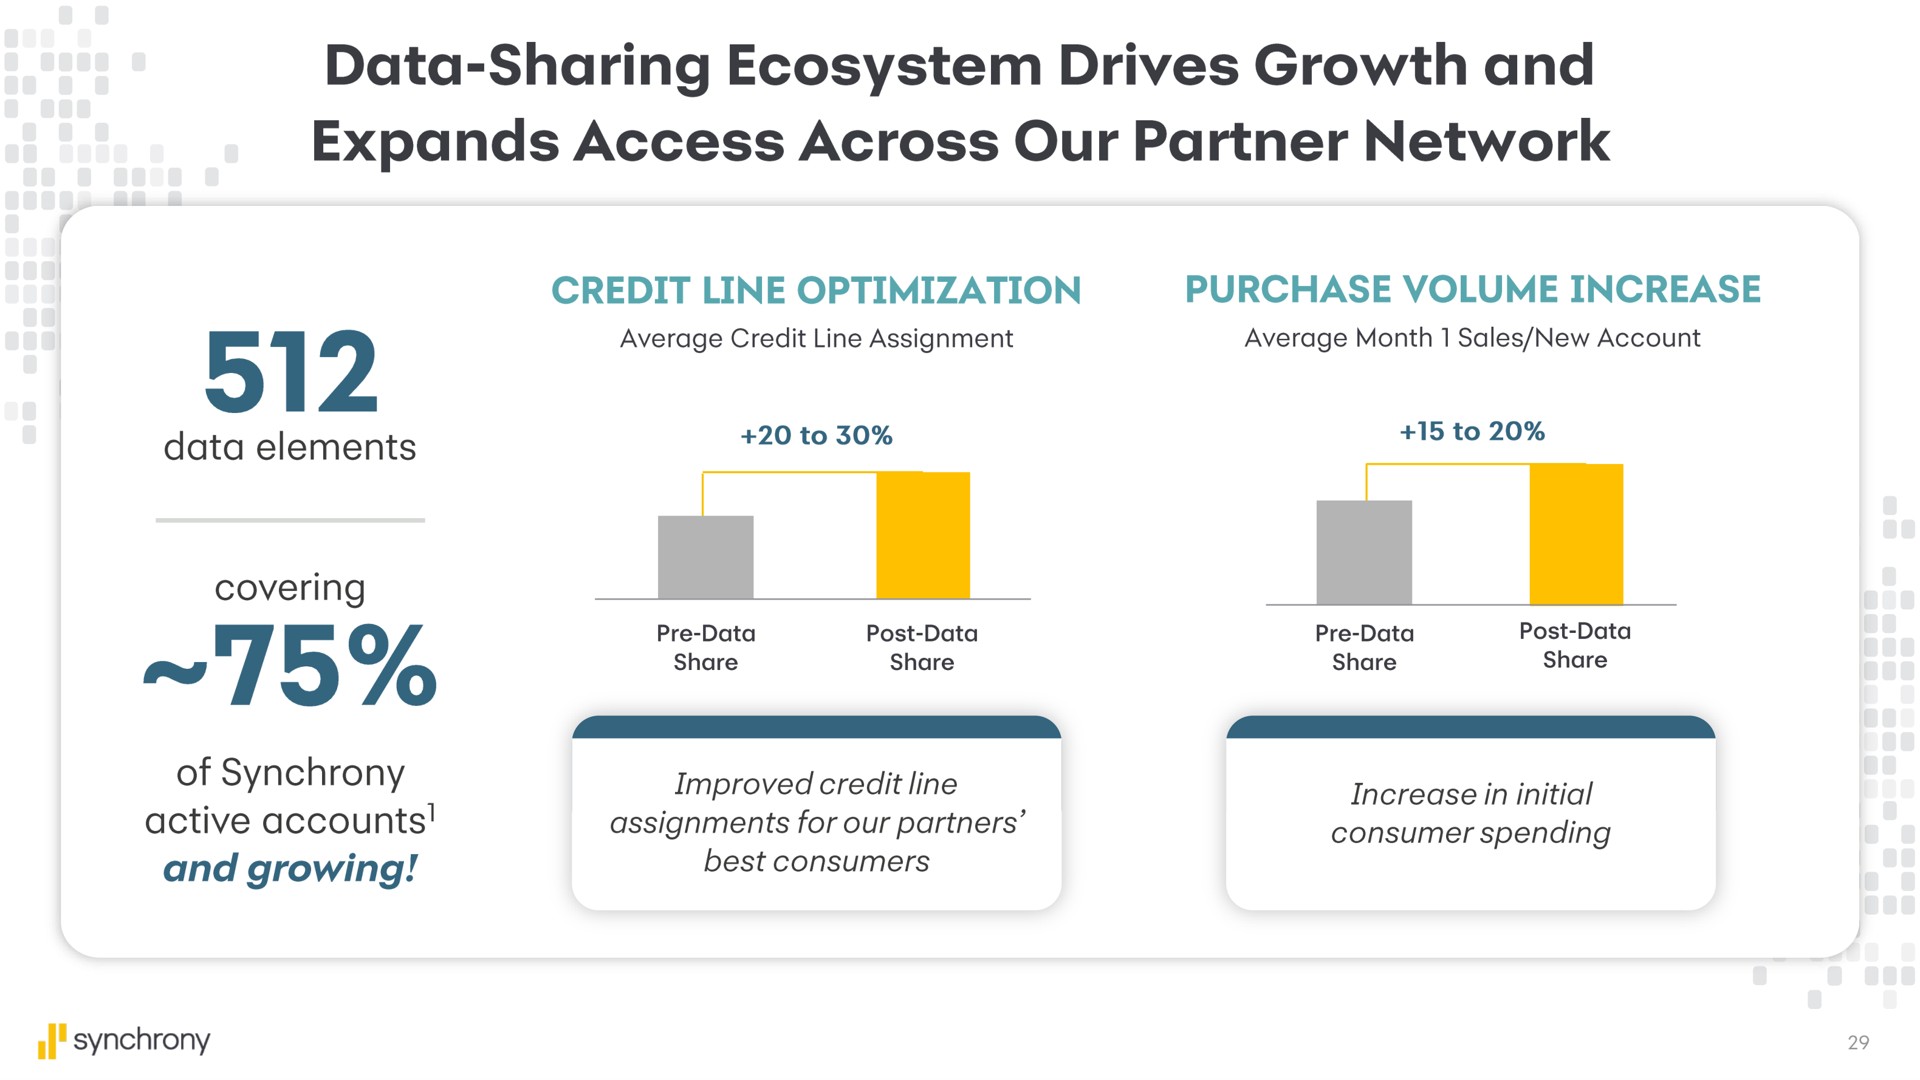 data sharing ecosystem drives growth and expands access across our partner network | Synchrony Financial